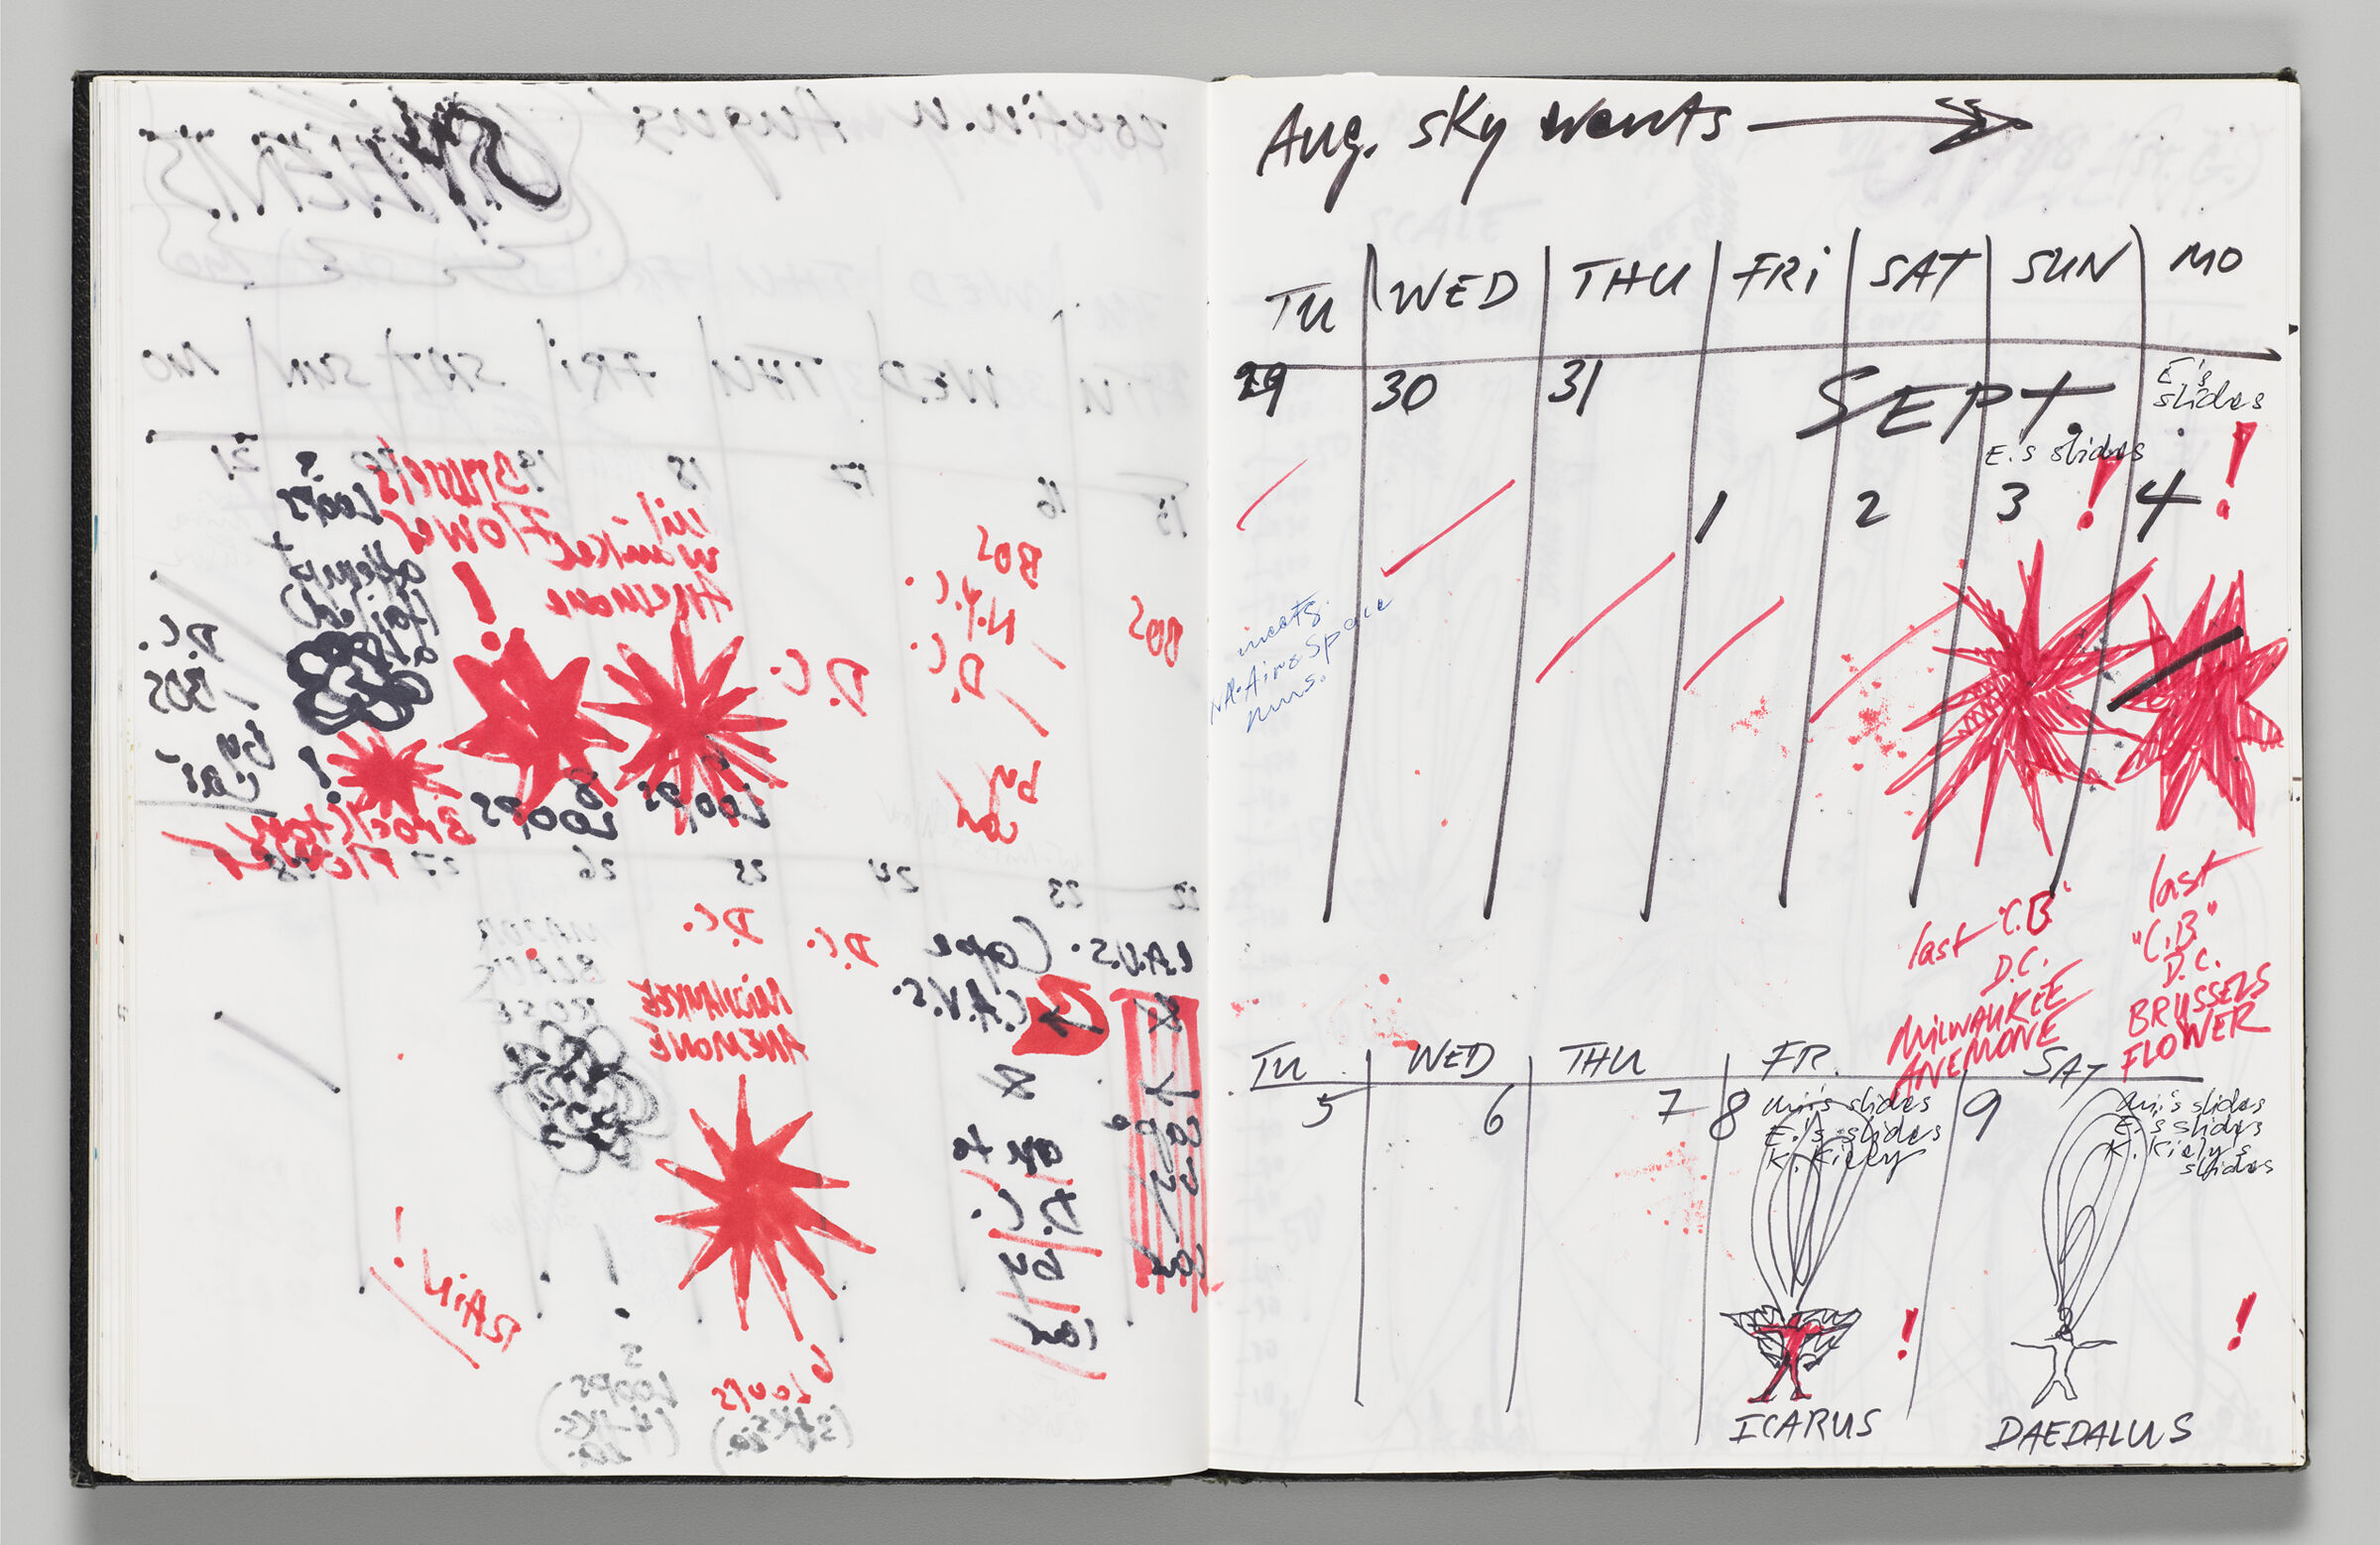 Untitled (Bleed-Through Of Previous Page And Color Transfer, Left Page); Untitled (Calendar For August 1978 With Color Transfer, Right Page)